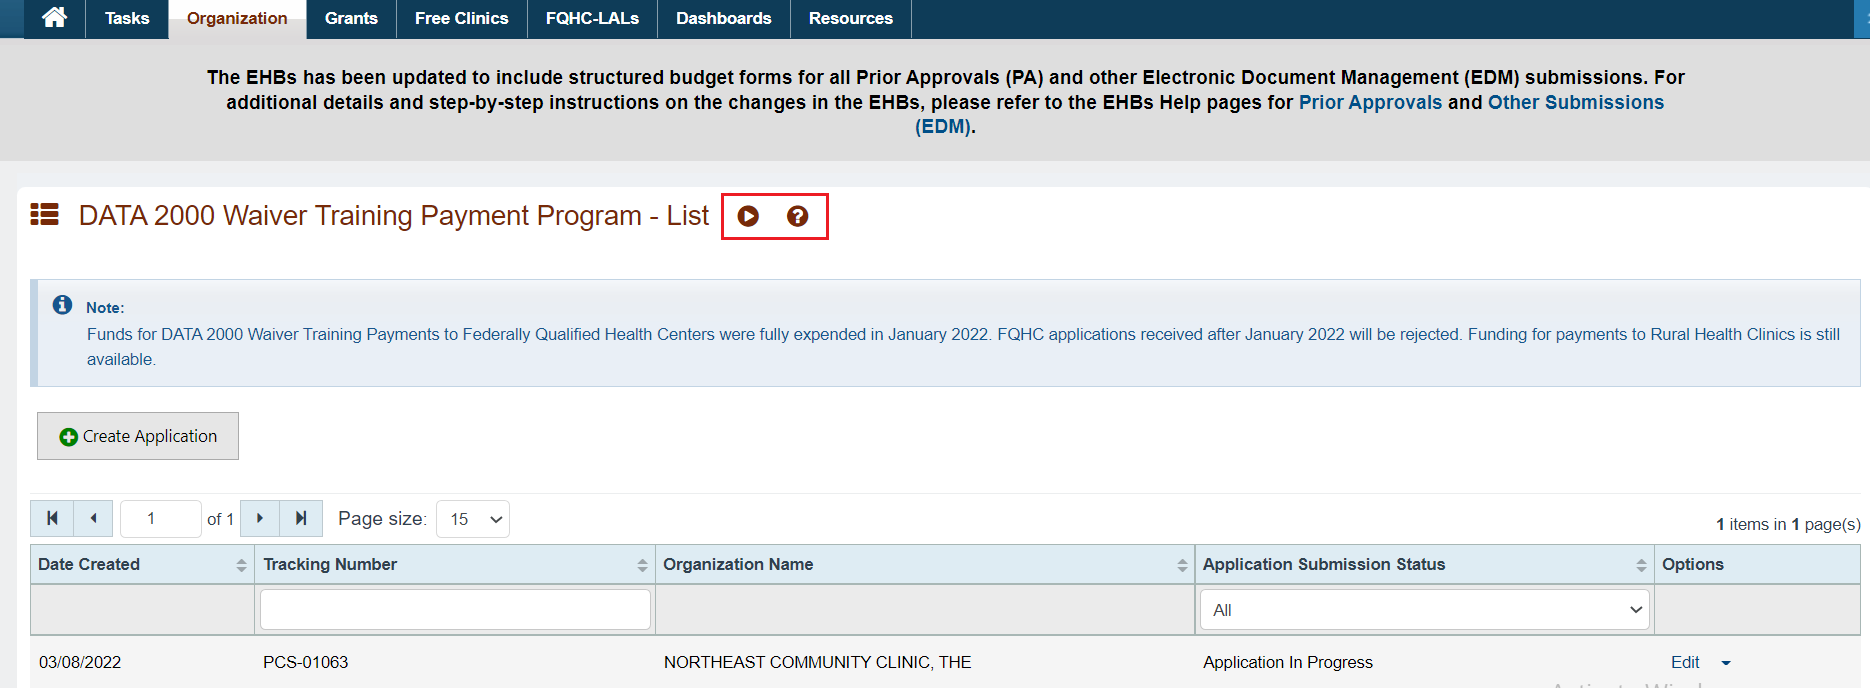 Screenshot of the Data 2000 Waiver Training Payment Program page showing help page and video buttons